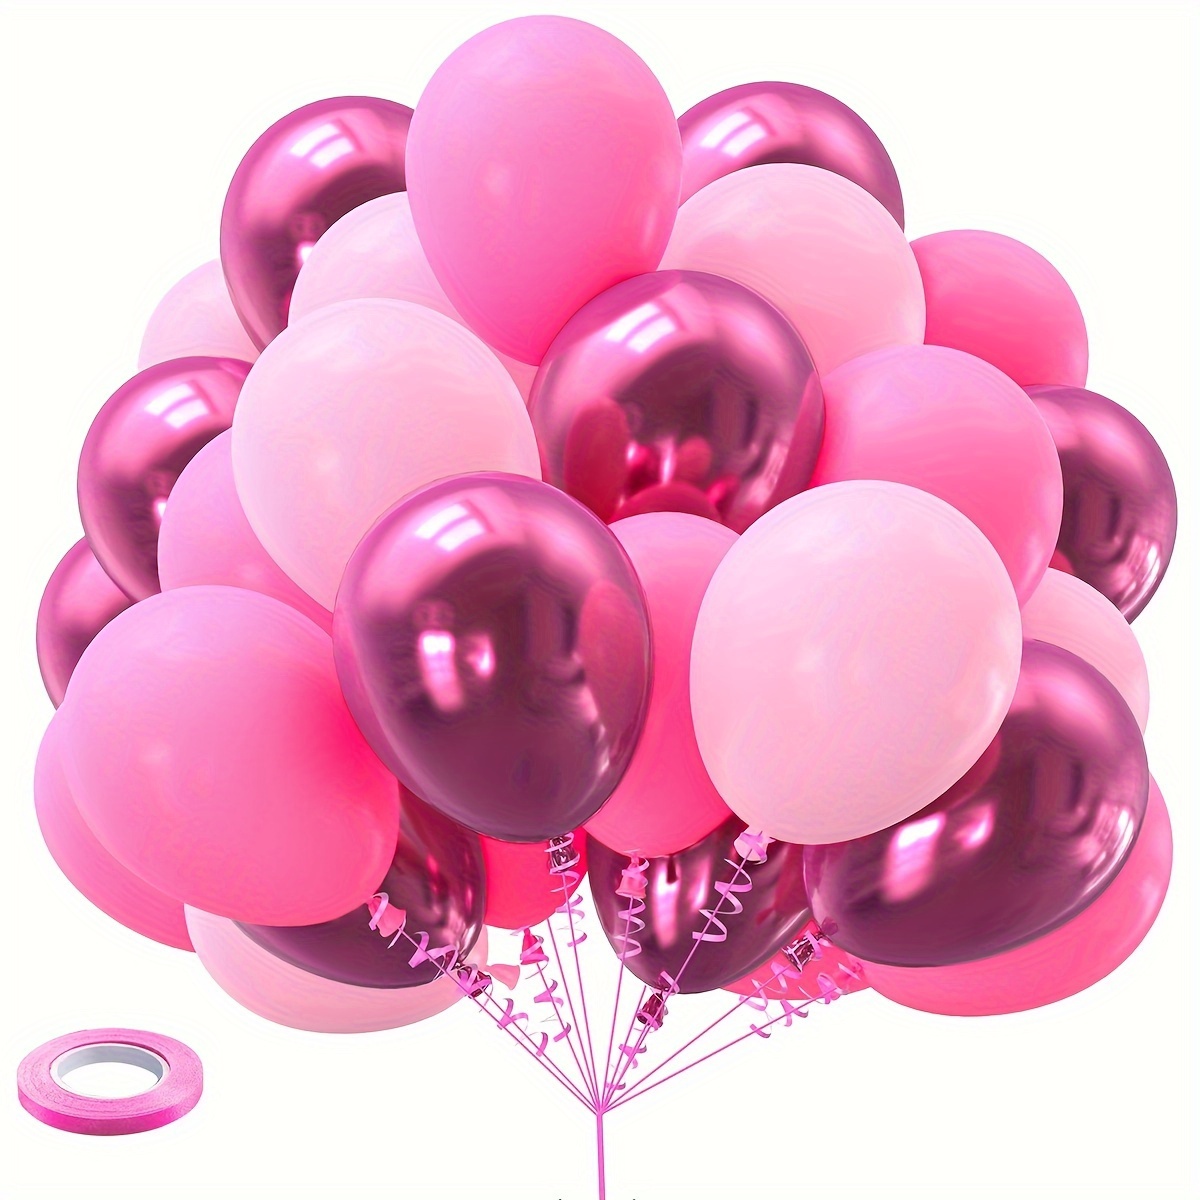 

61-piece Metallic Rose Balloon Set - 12" Latex, Perfect For Princess Birthdays, Weddings & Engagements - Includes Curling Ribbon